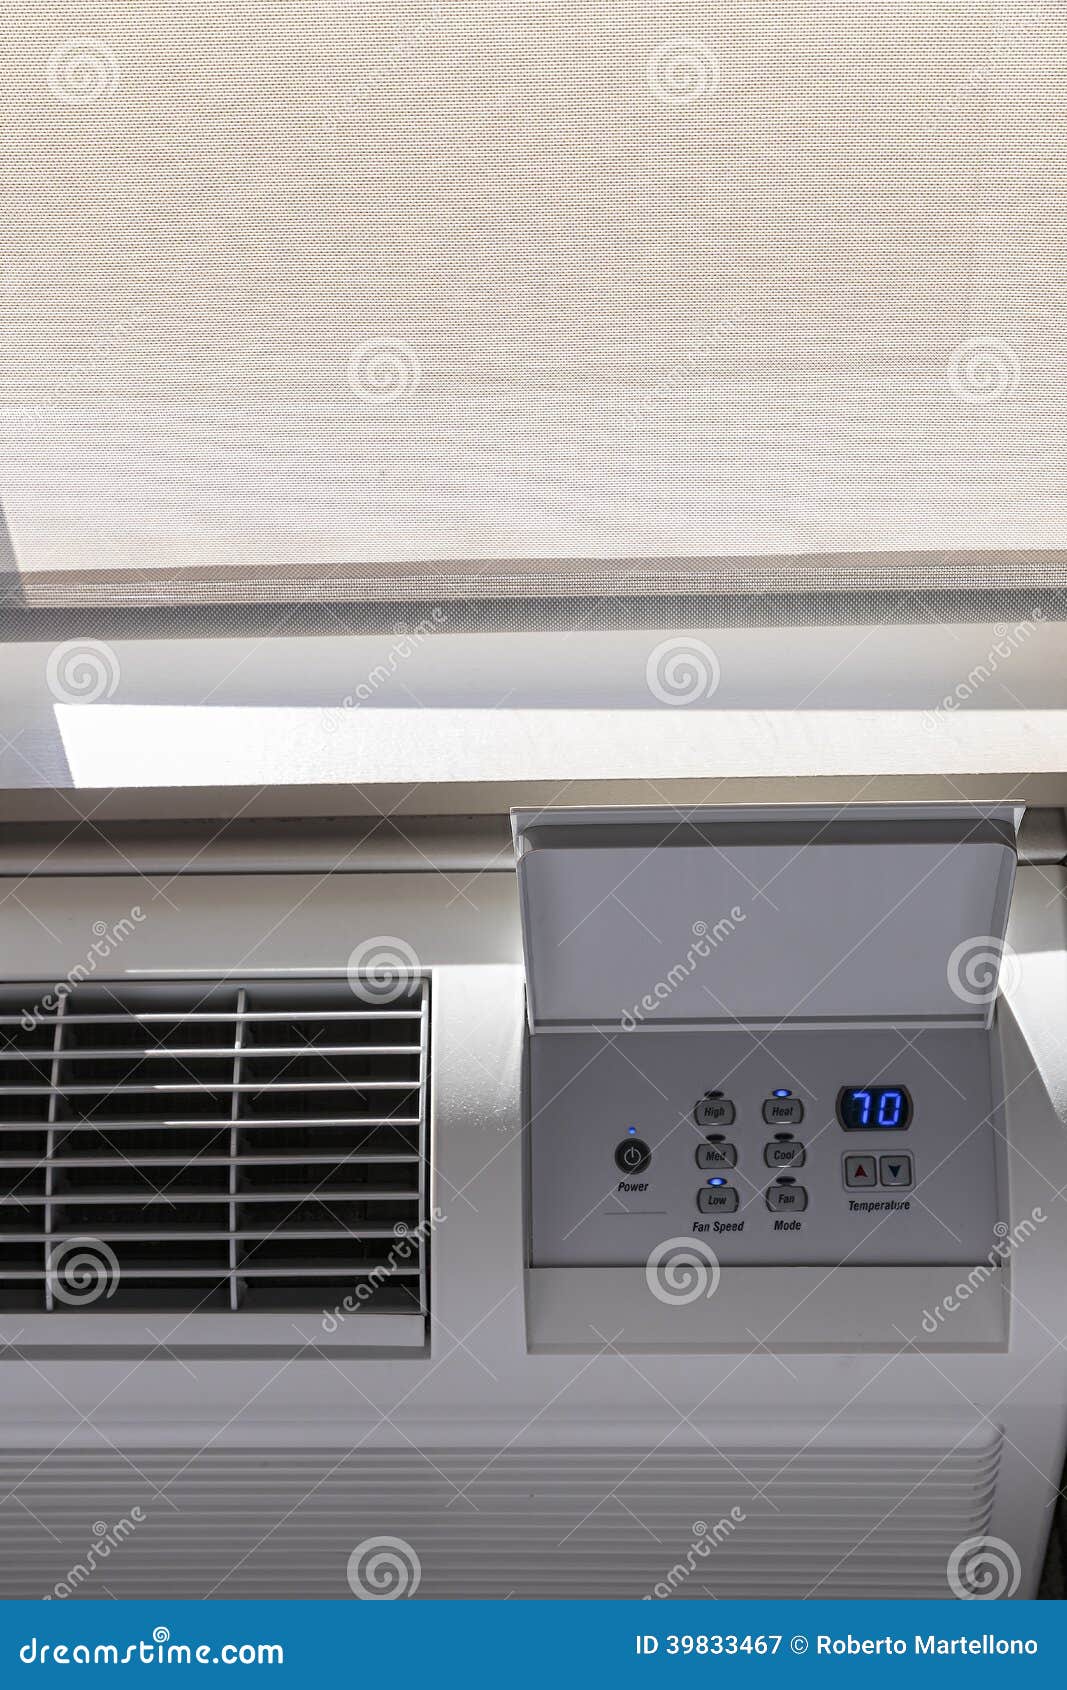 Heating - Air Conditioning Thermostat Stock Image - Image of savings ...